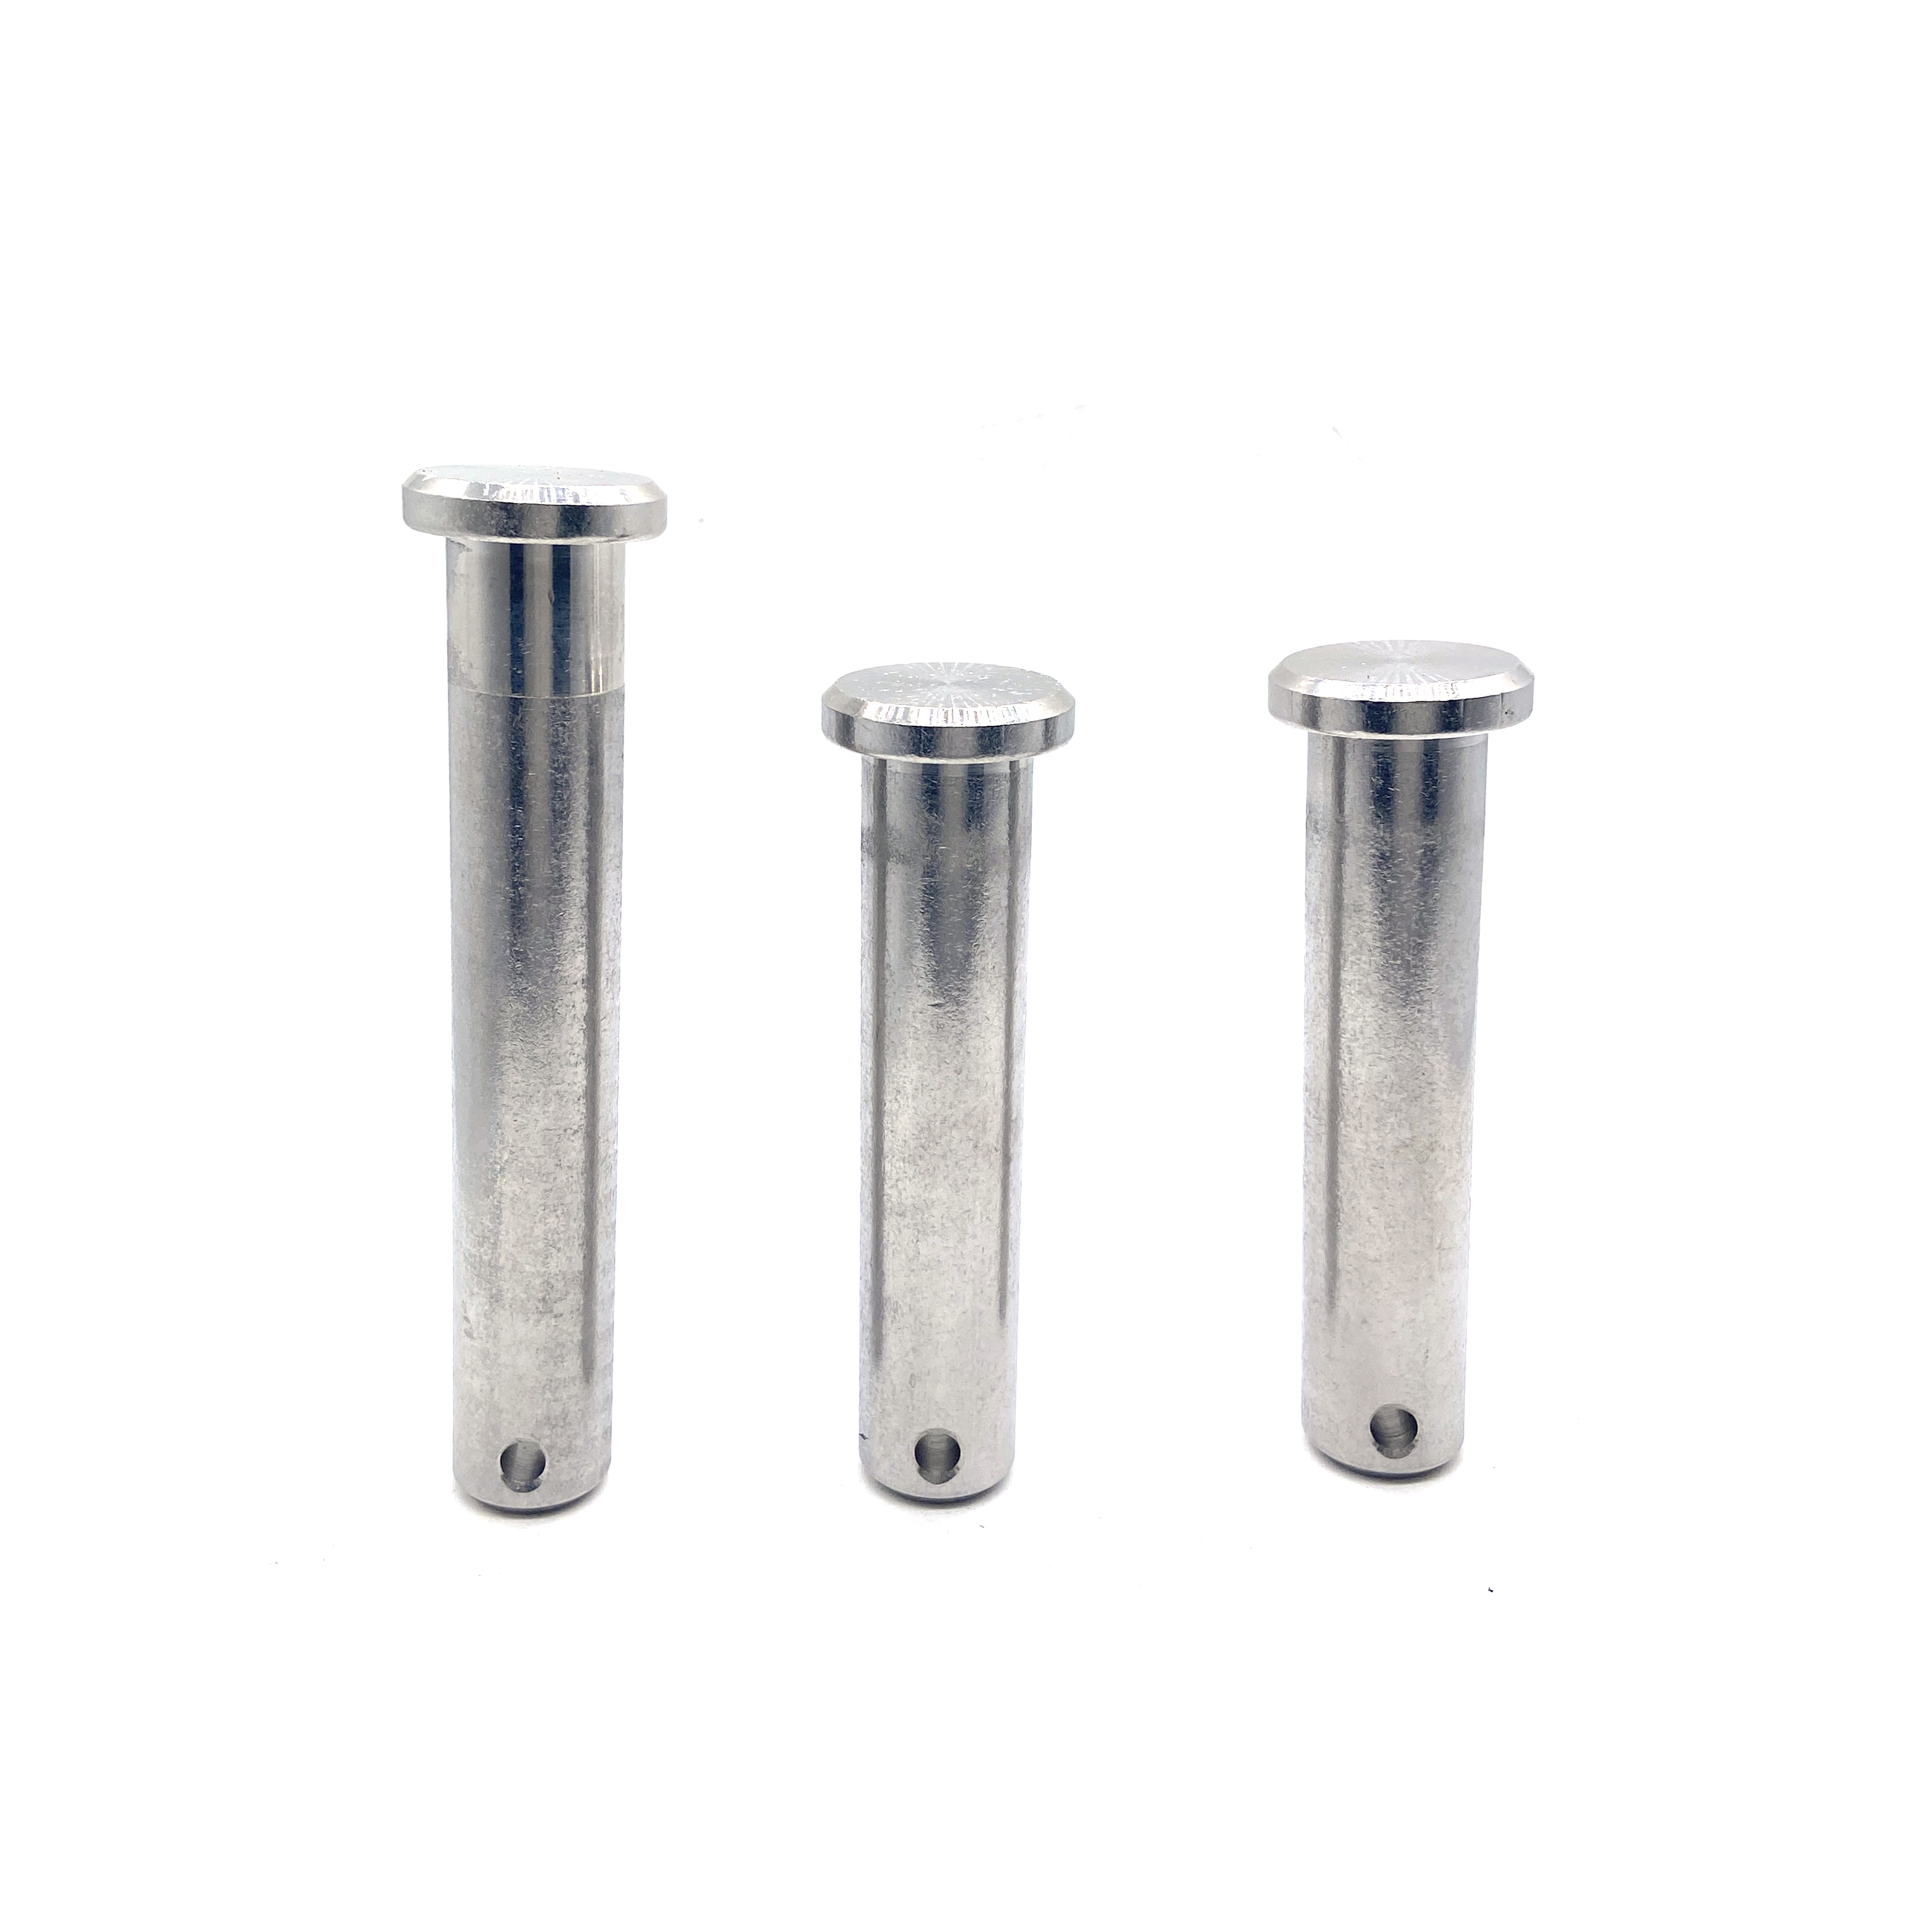 M3 M6 Stainless Steel A2 SS304 Lock Pin Clevis Pin with Hole